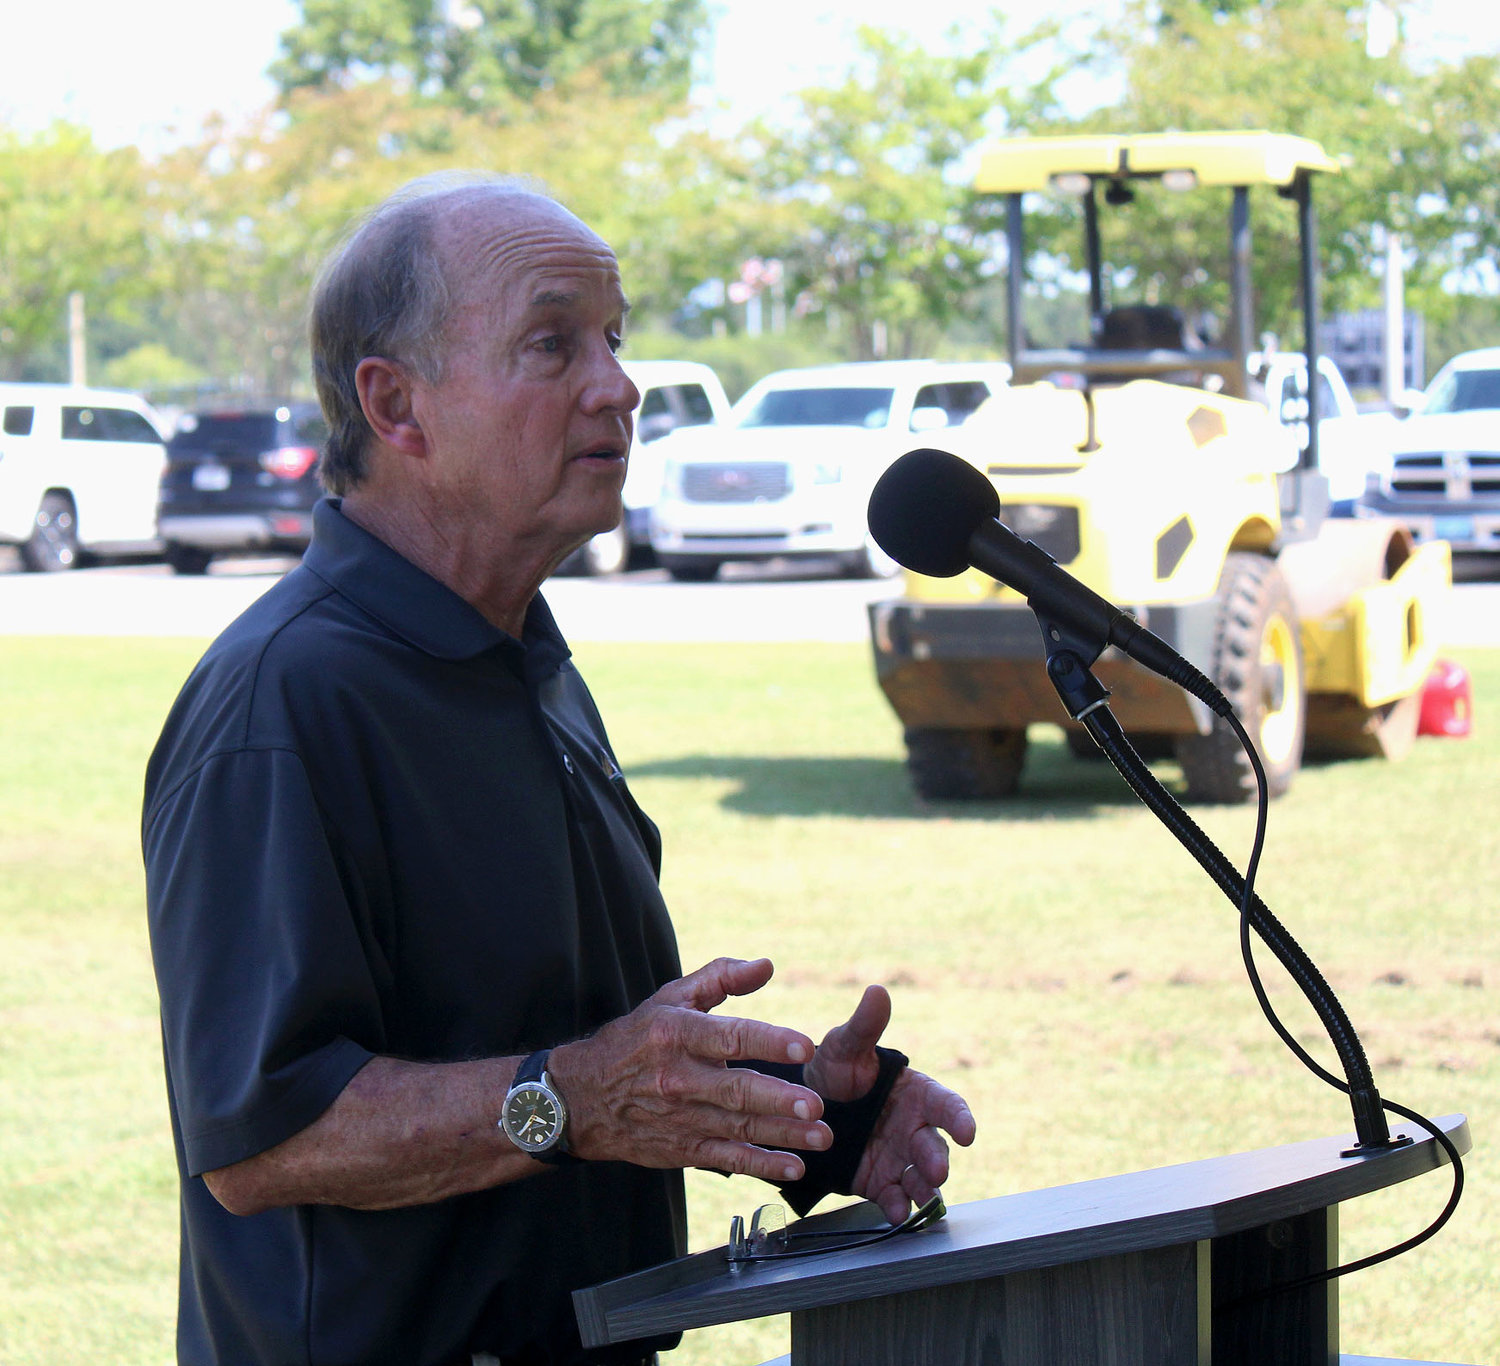 Gulf Shores Mayor Robert Craft said the city had originally planned to build only six pickleball courts but partnered with Gulf Shores | Orange Beach Sports & Events who doubled the number of courts and agreed to split the cost of the $780,000 project.